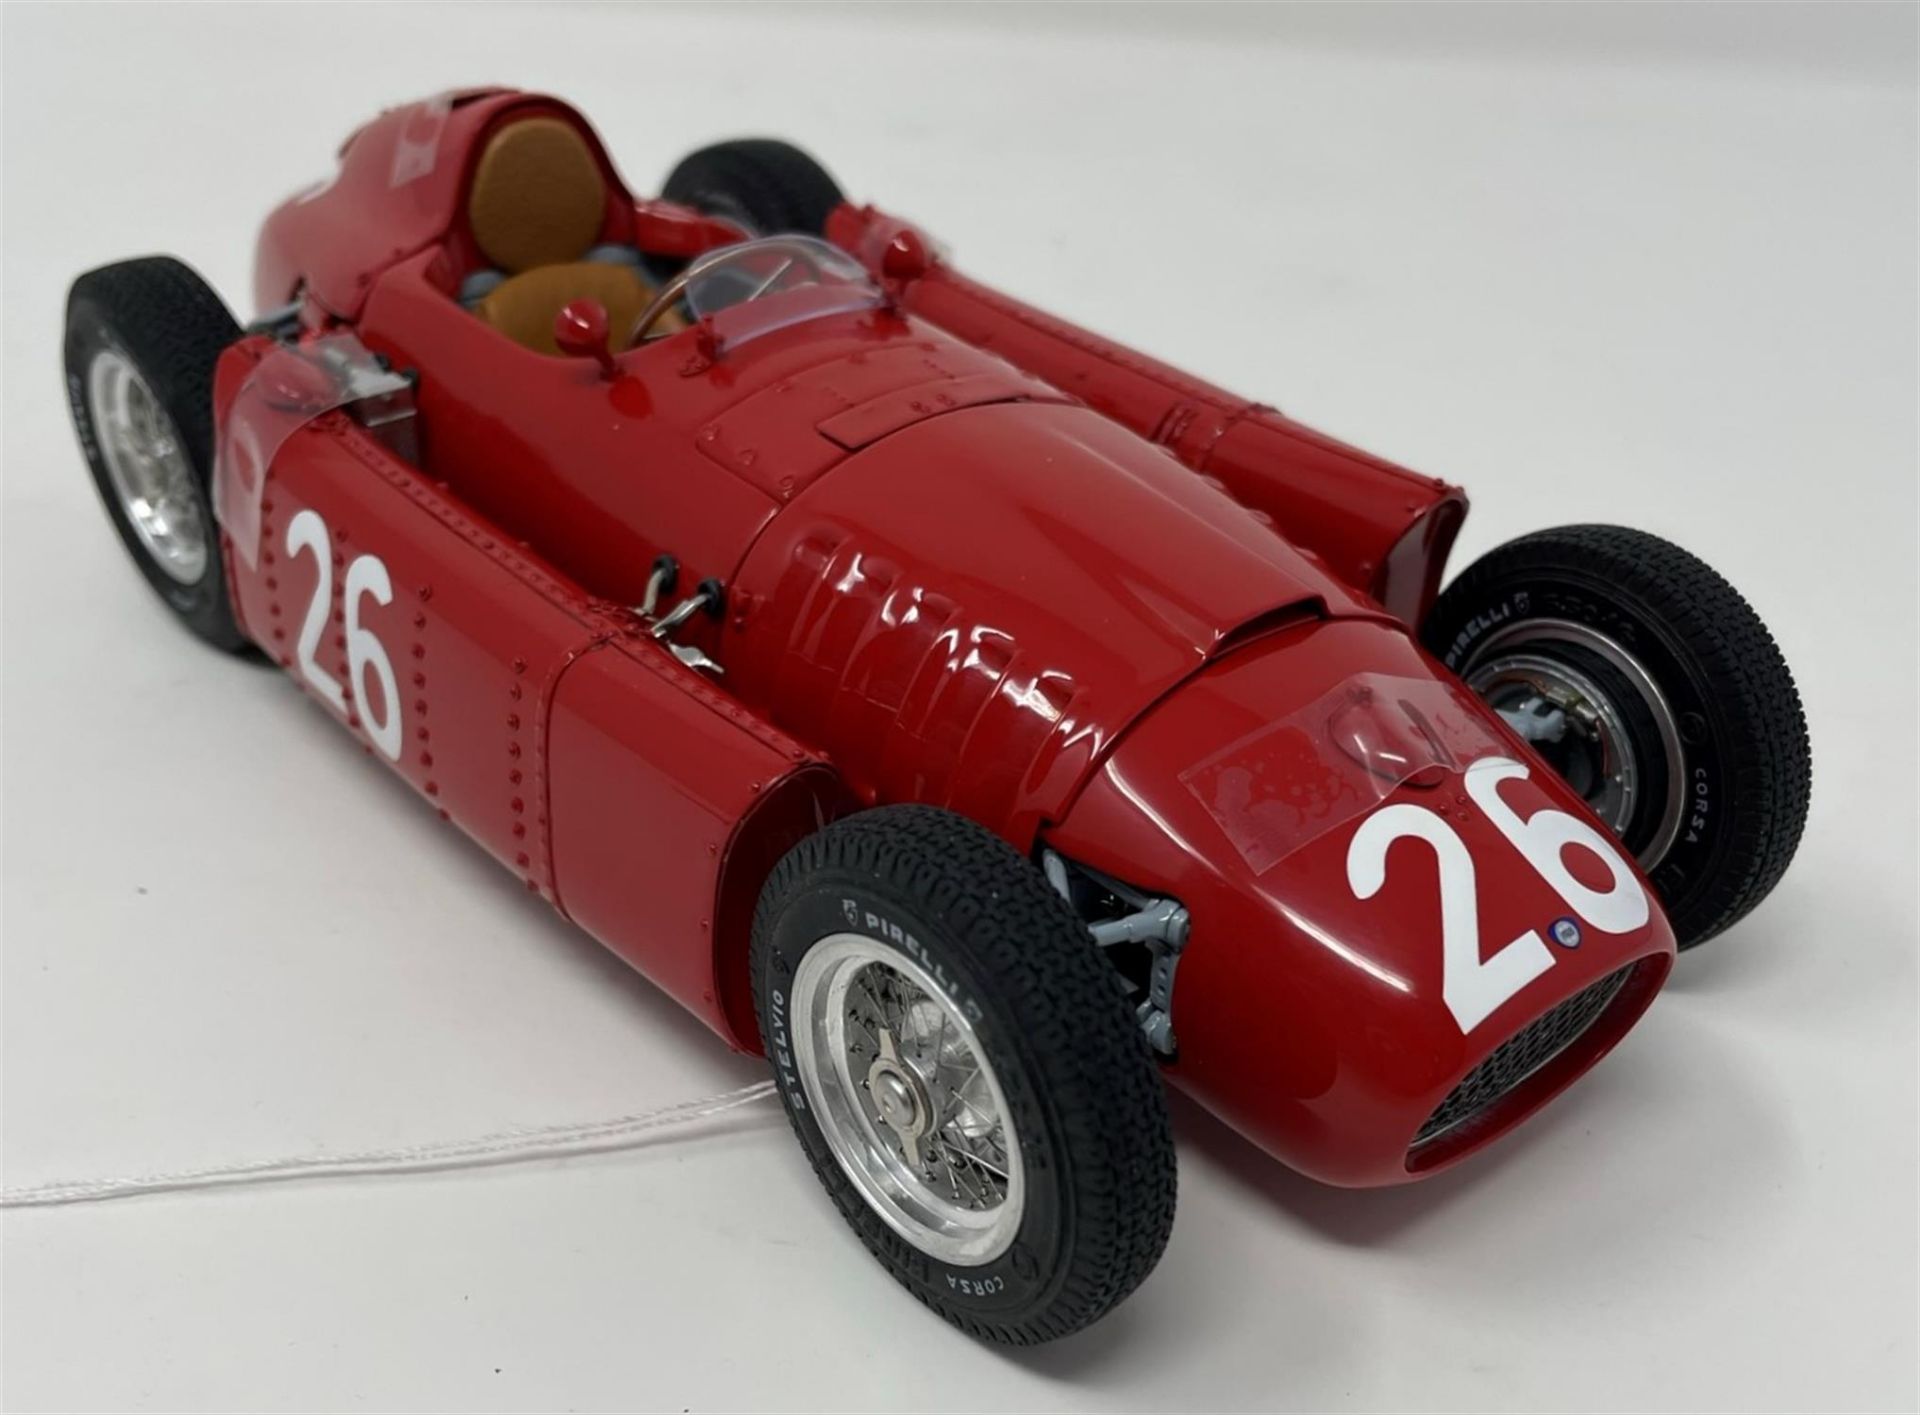 CMC Lancia D50 1:18th Scale Highly Detailed Model - Image 8 of 10